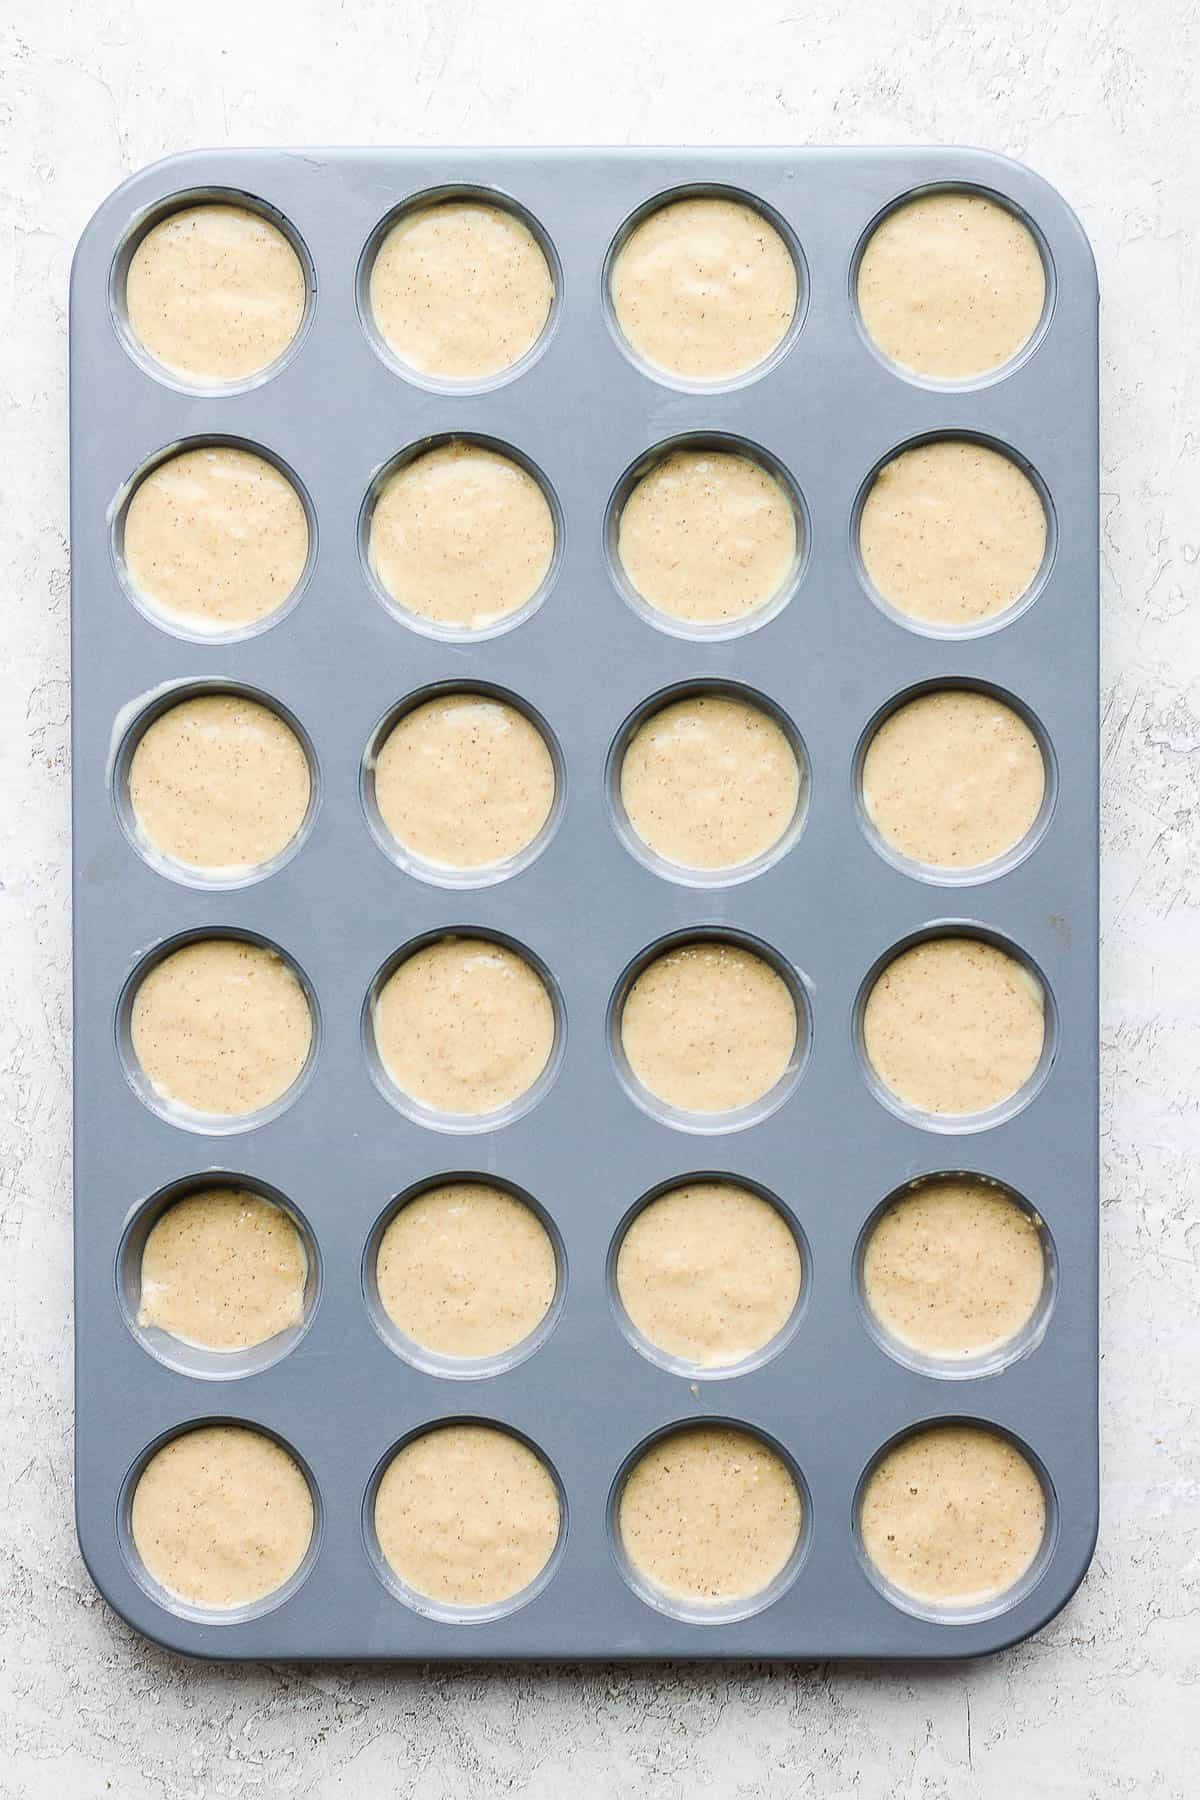 The pancake batter poured into mini muffin tins.